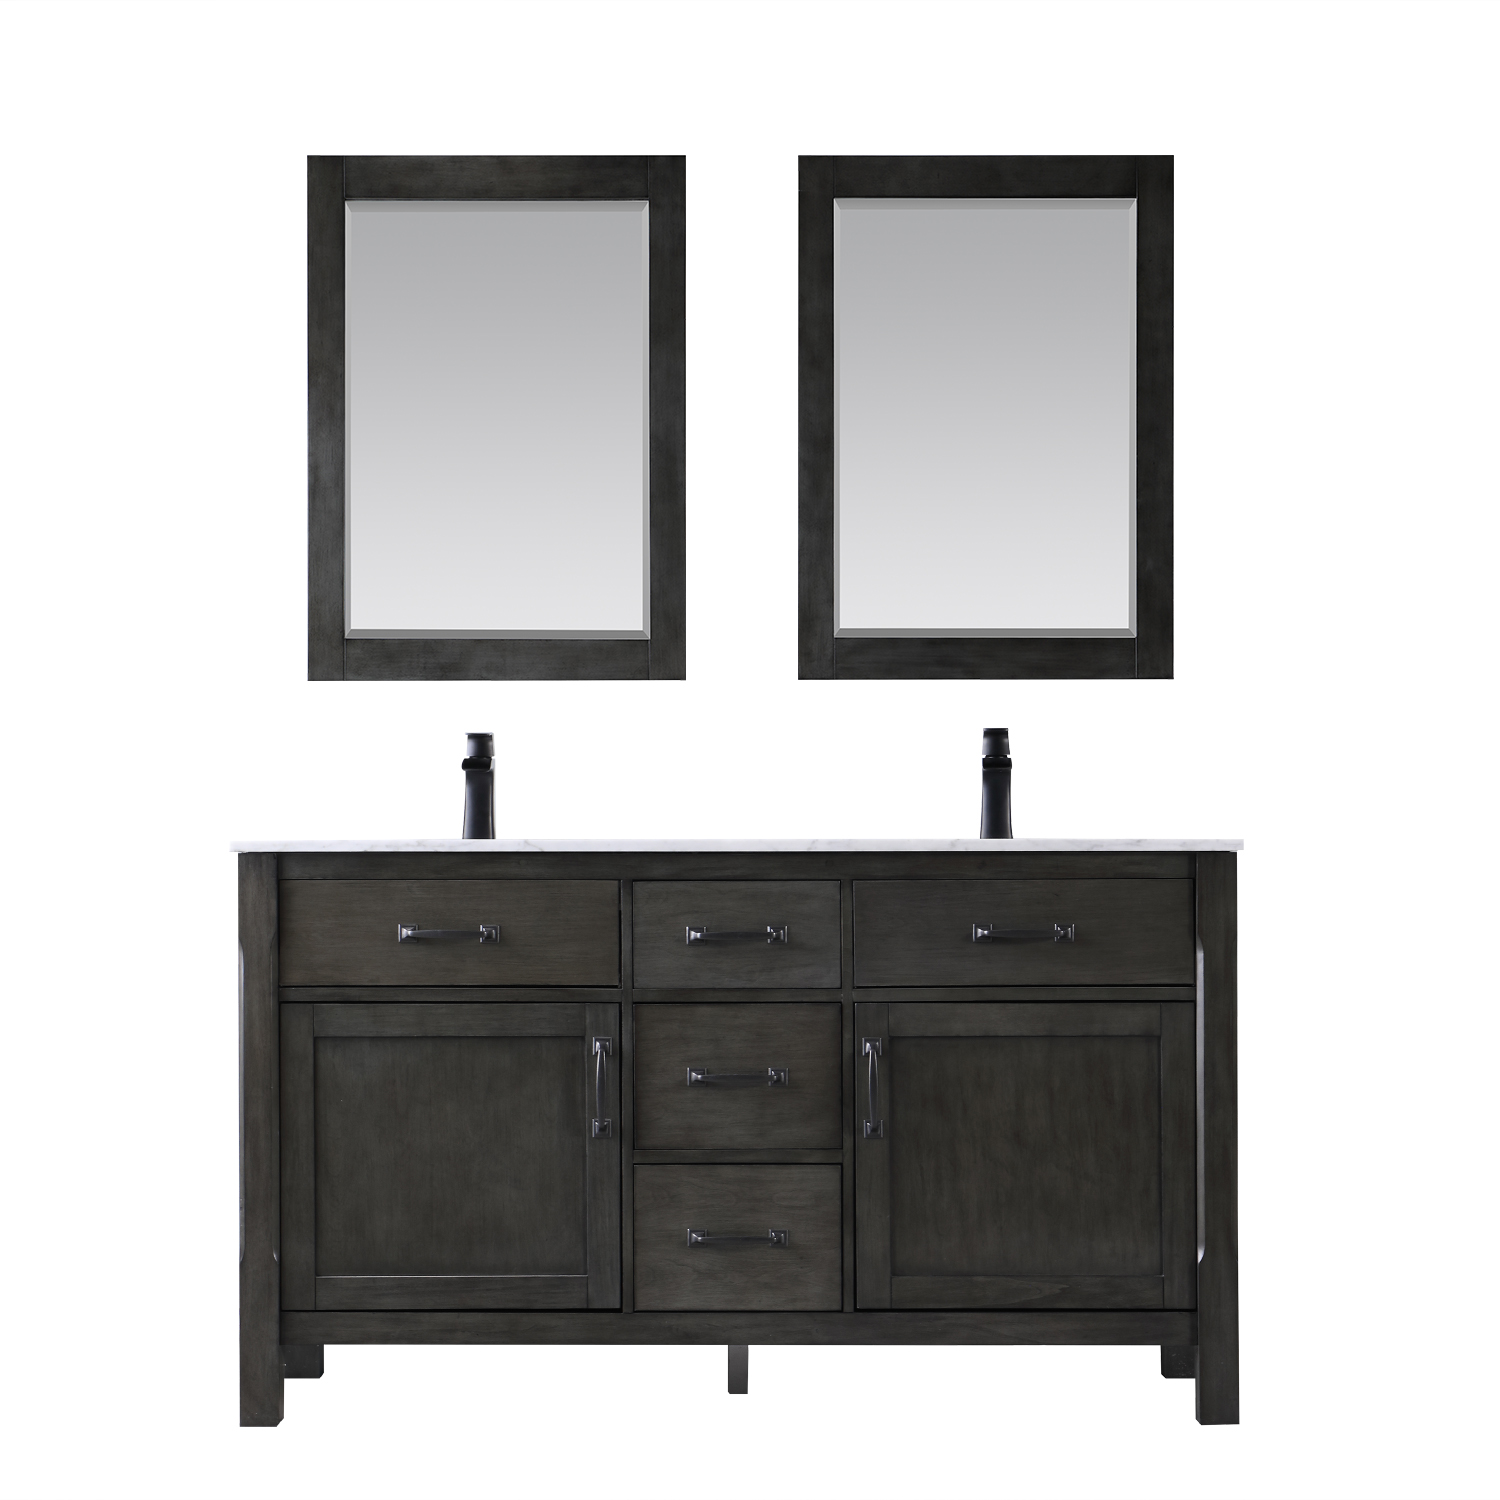 Issac Edwards Collection 60" Double Bathroom Vanity Set in Rust Black and Carrara White Marble Countertop without Mirror 